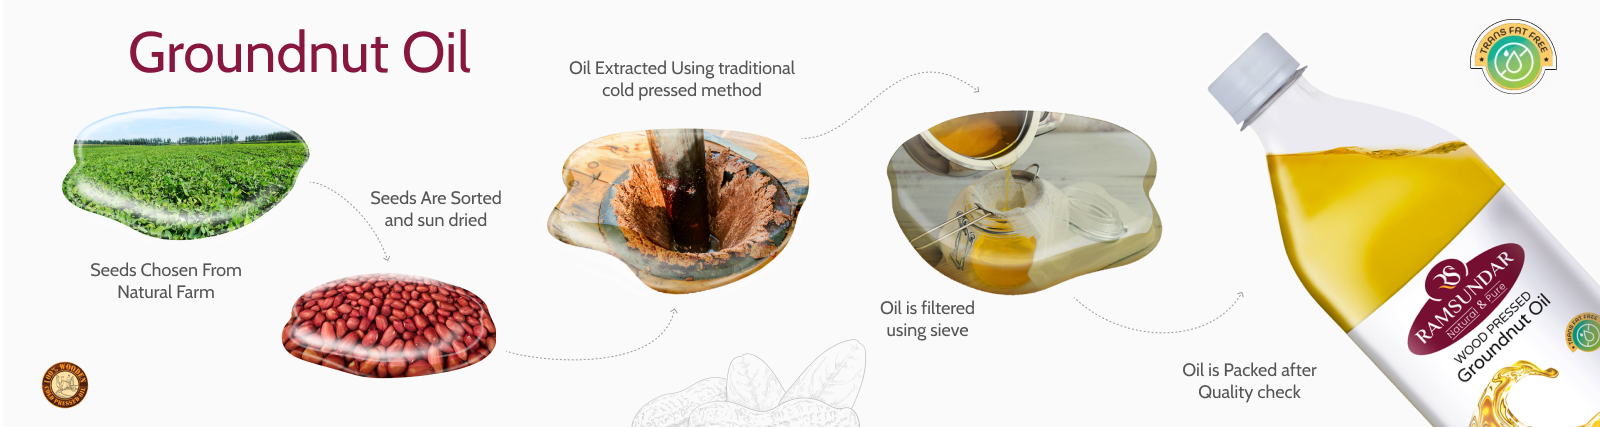 groundnut oil making process